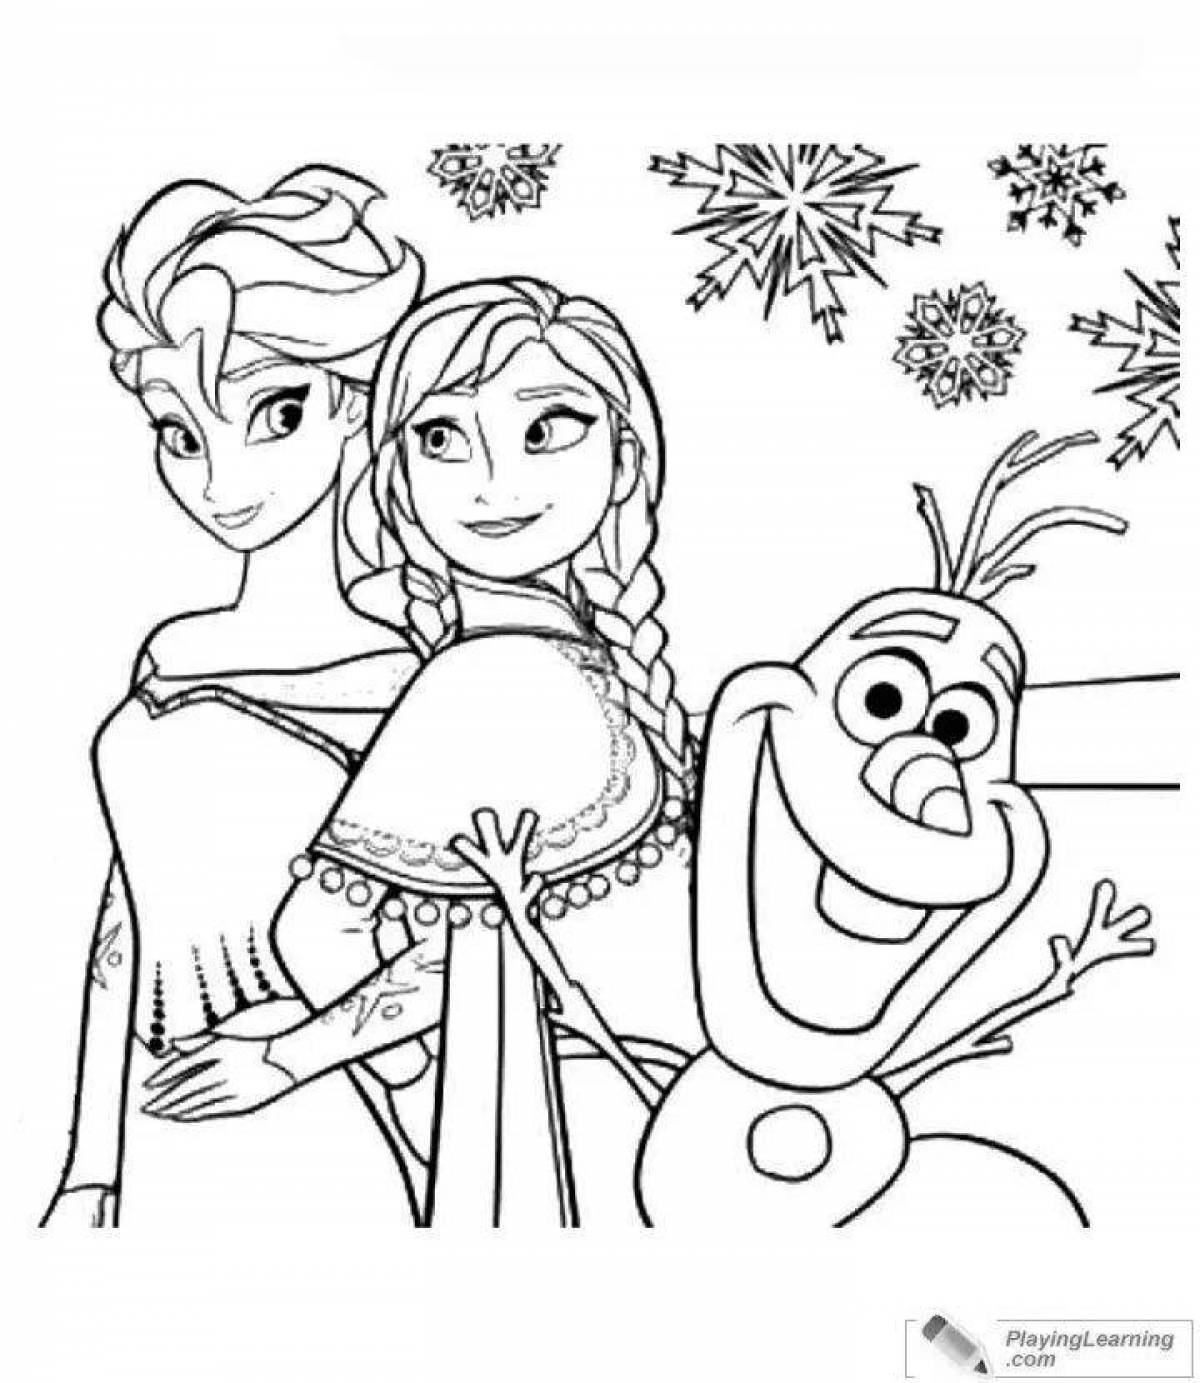 Elsa live coloring for children 5-6 years old